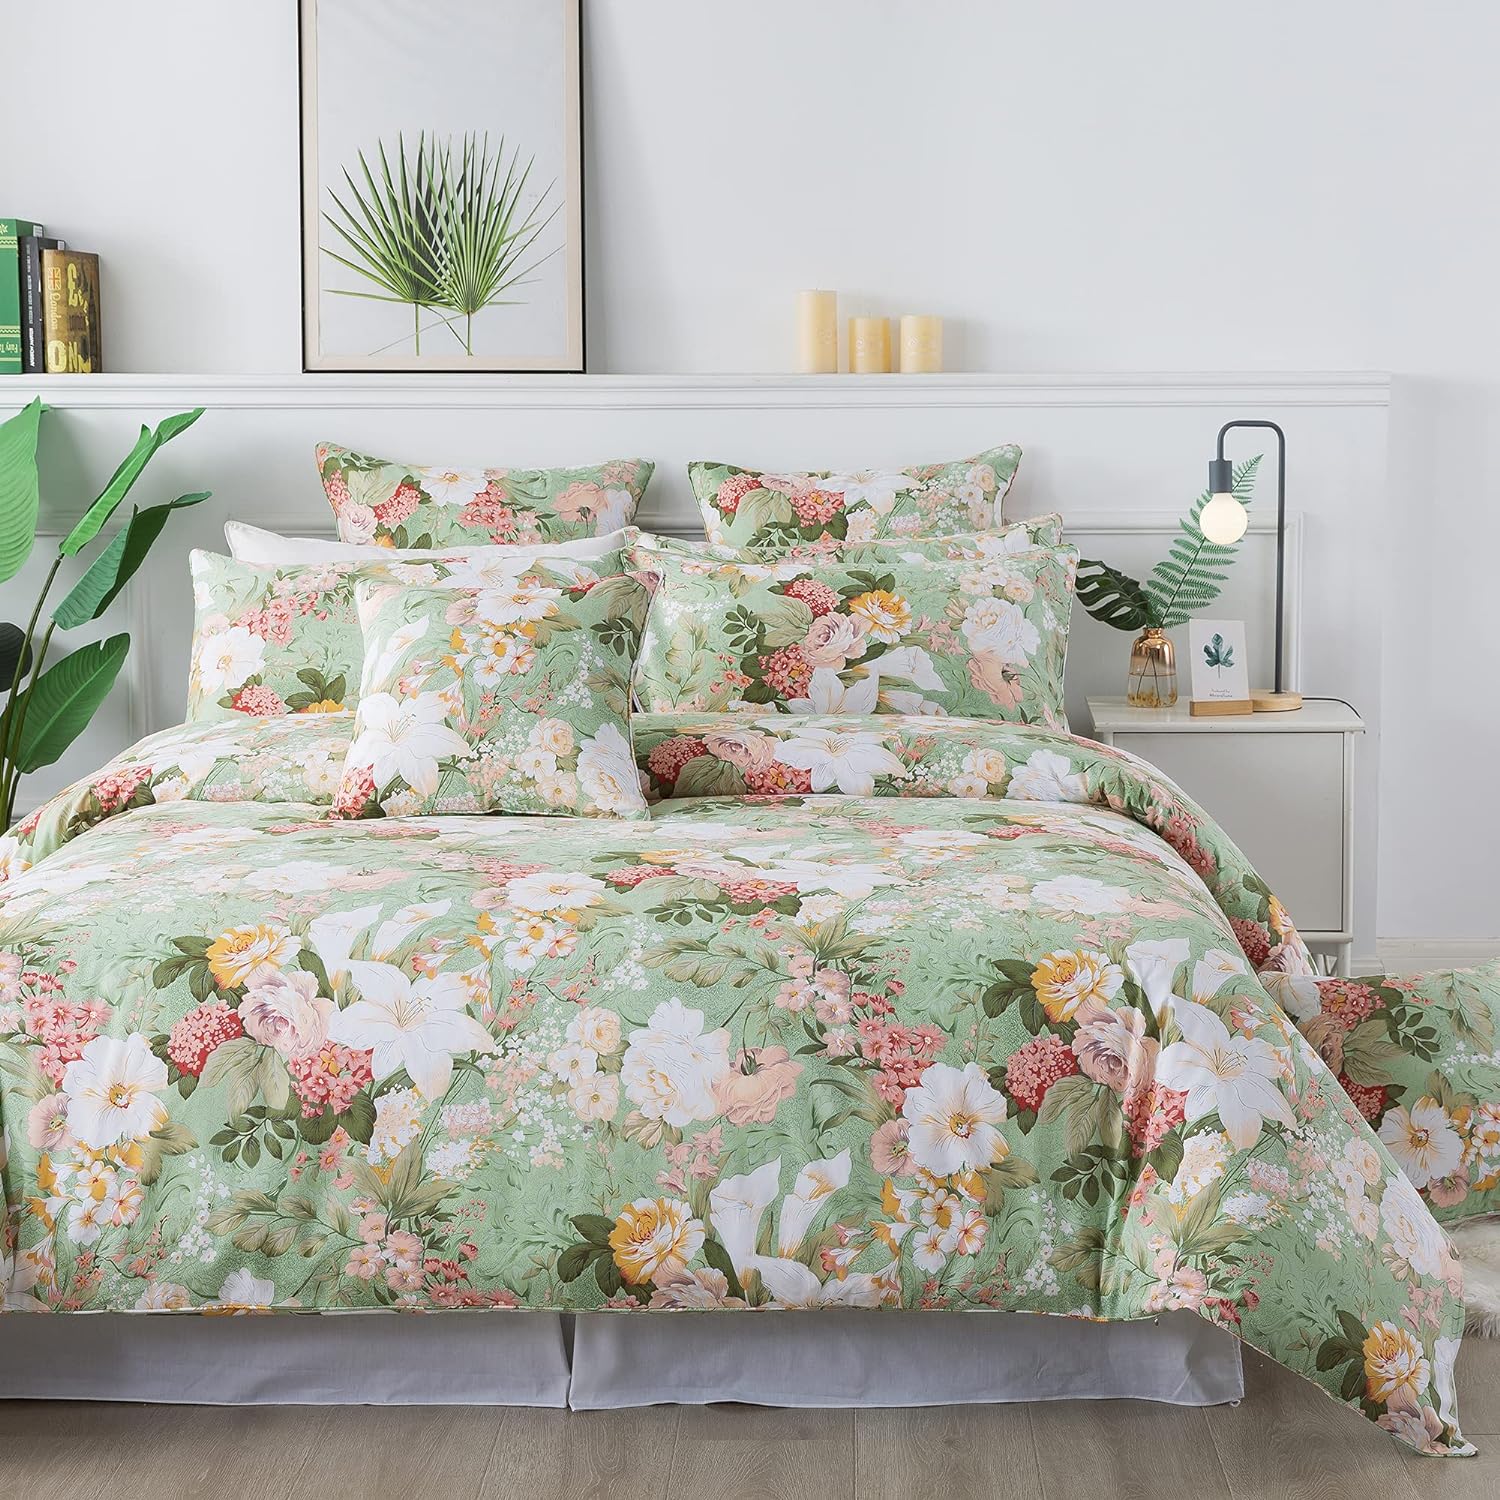 FADFAY Floral Duvet Cover Set Full 100% Cotton Girls Bedding 600 TC Mint Green and White Flower Elegant Lily Printed Comforter Cover Zipper Corner Ties Soft Bed Cover 3 Pcs